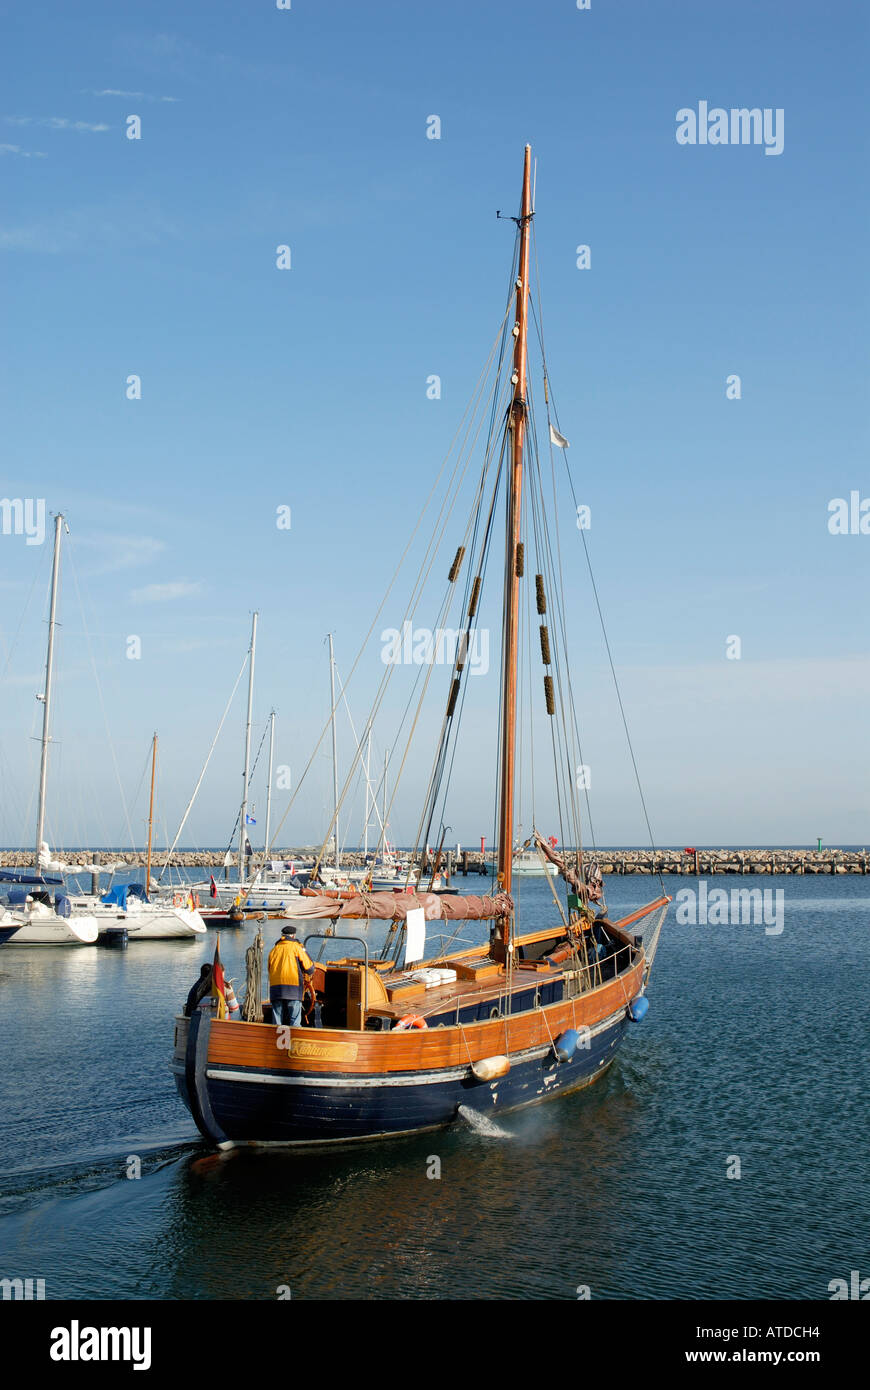 Historic fishing cutter leaves the marina at Kuehlungsborn, Mecklenburg-Vorpommern, Germany Stock Photo